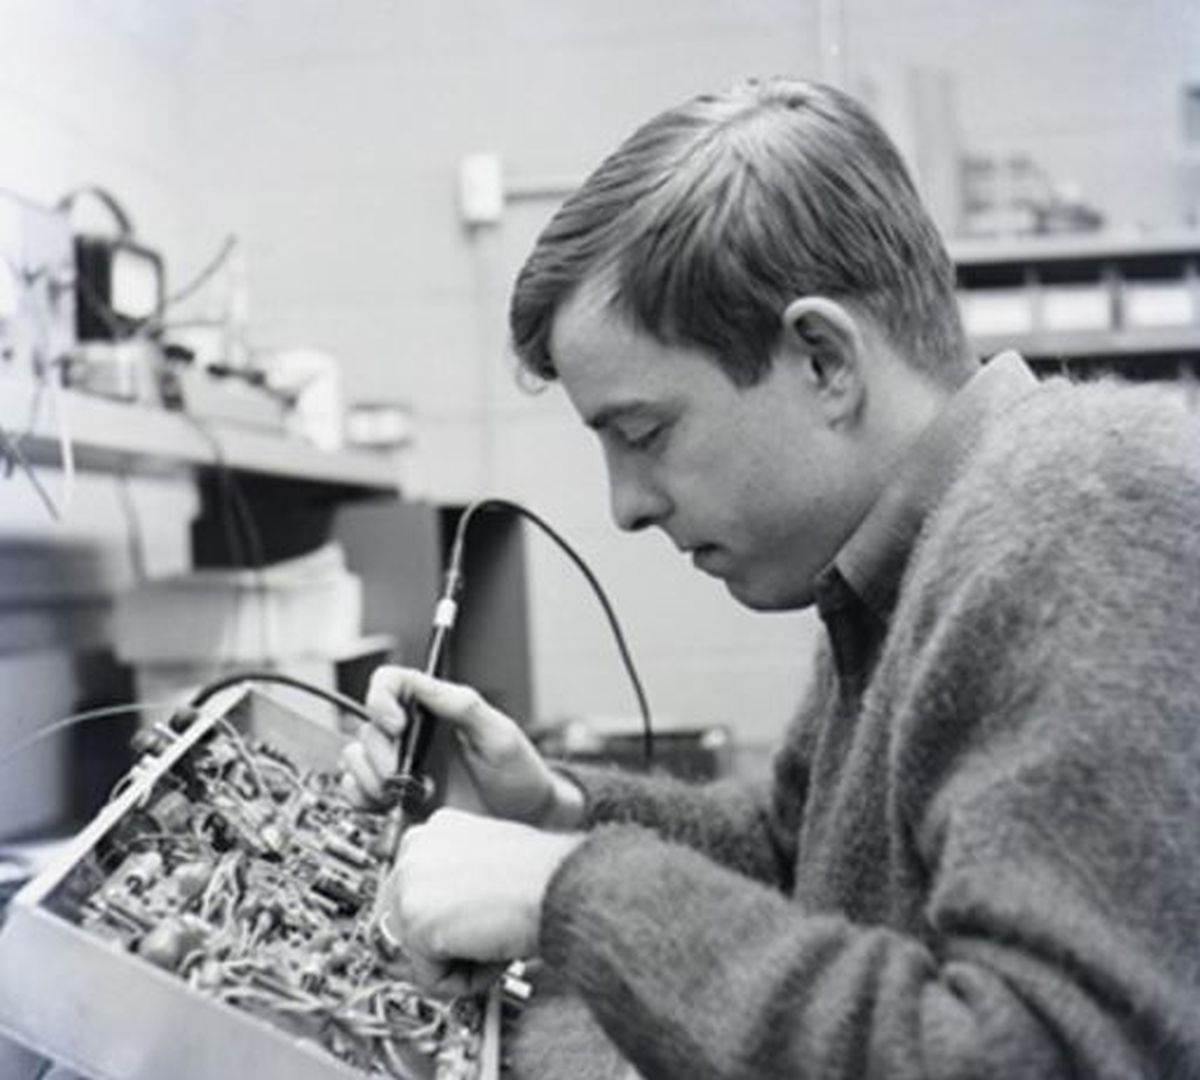 Young Hartley Peavey, Peaveys founder, while crafting.